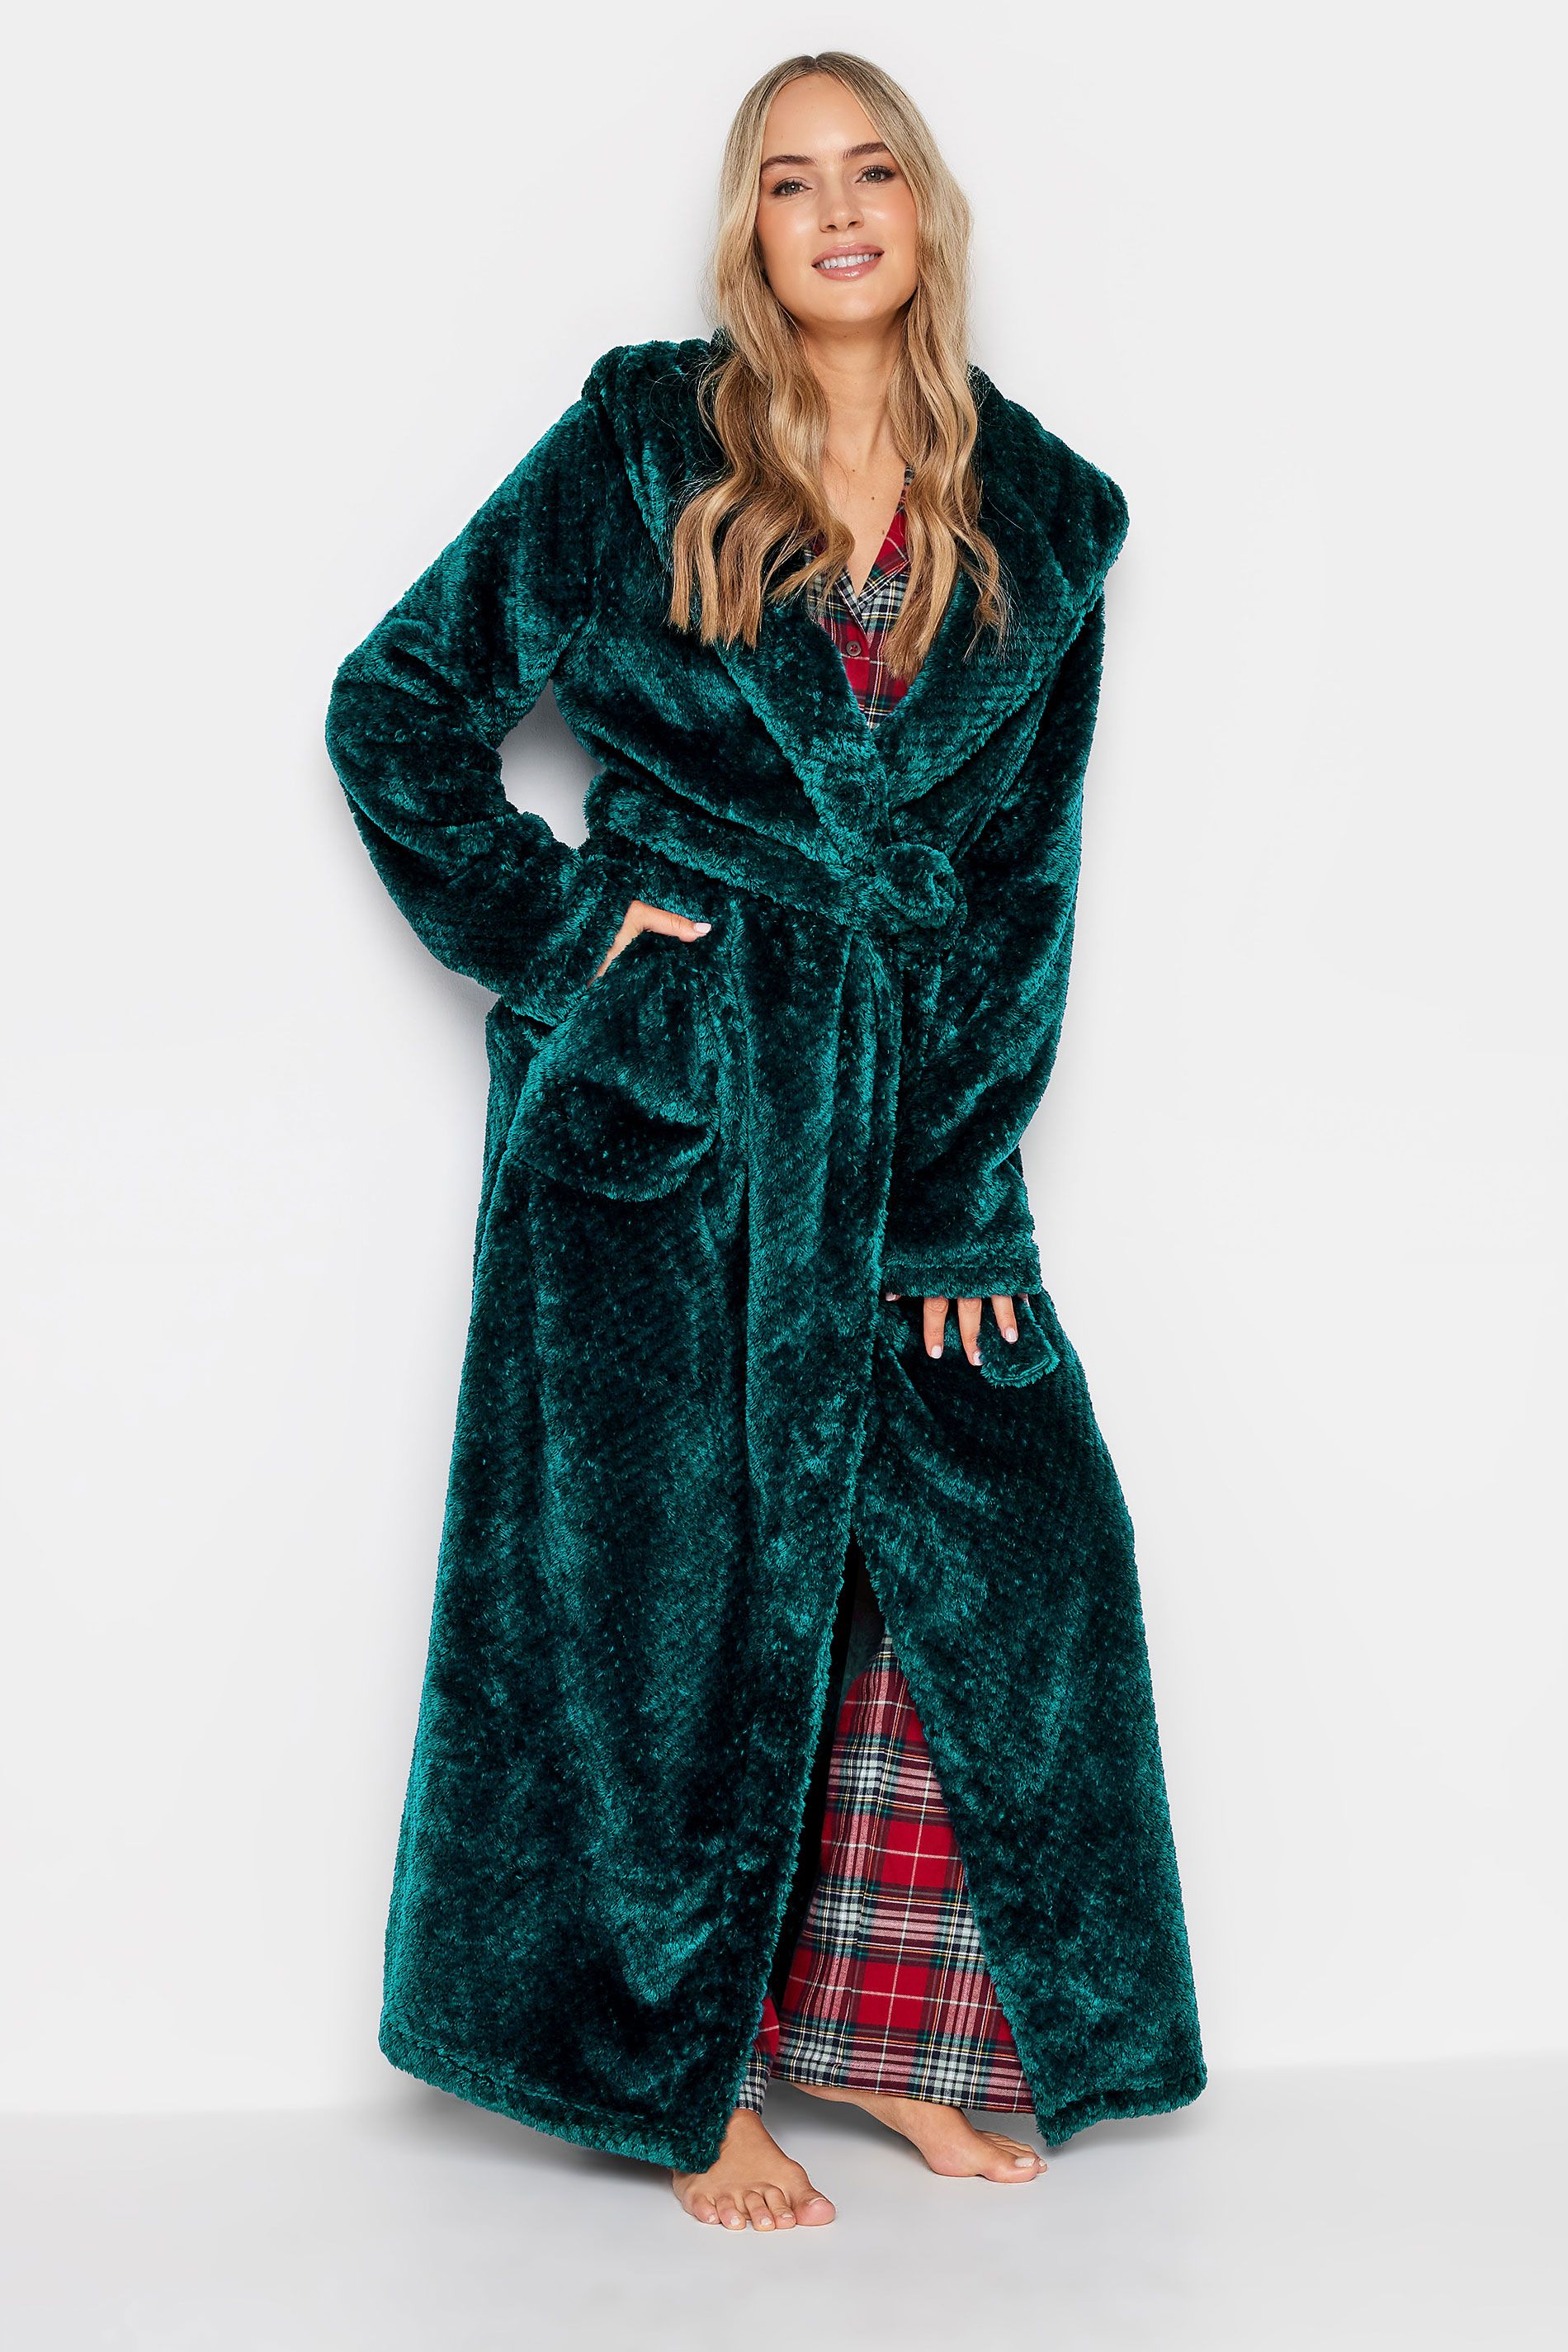 LTS Tall Emerald Green Hooded Maxi Dressing Gown | Long Tall Sally